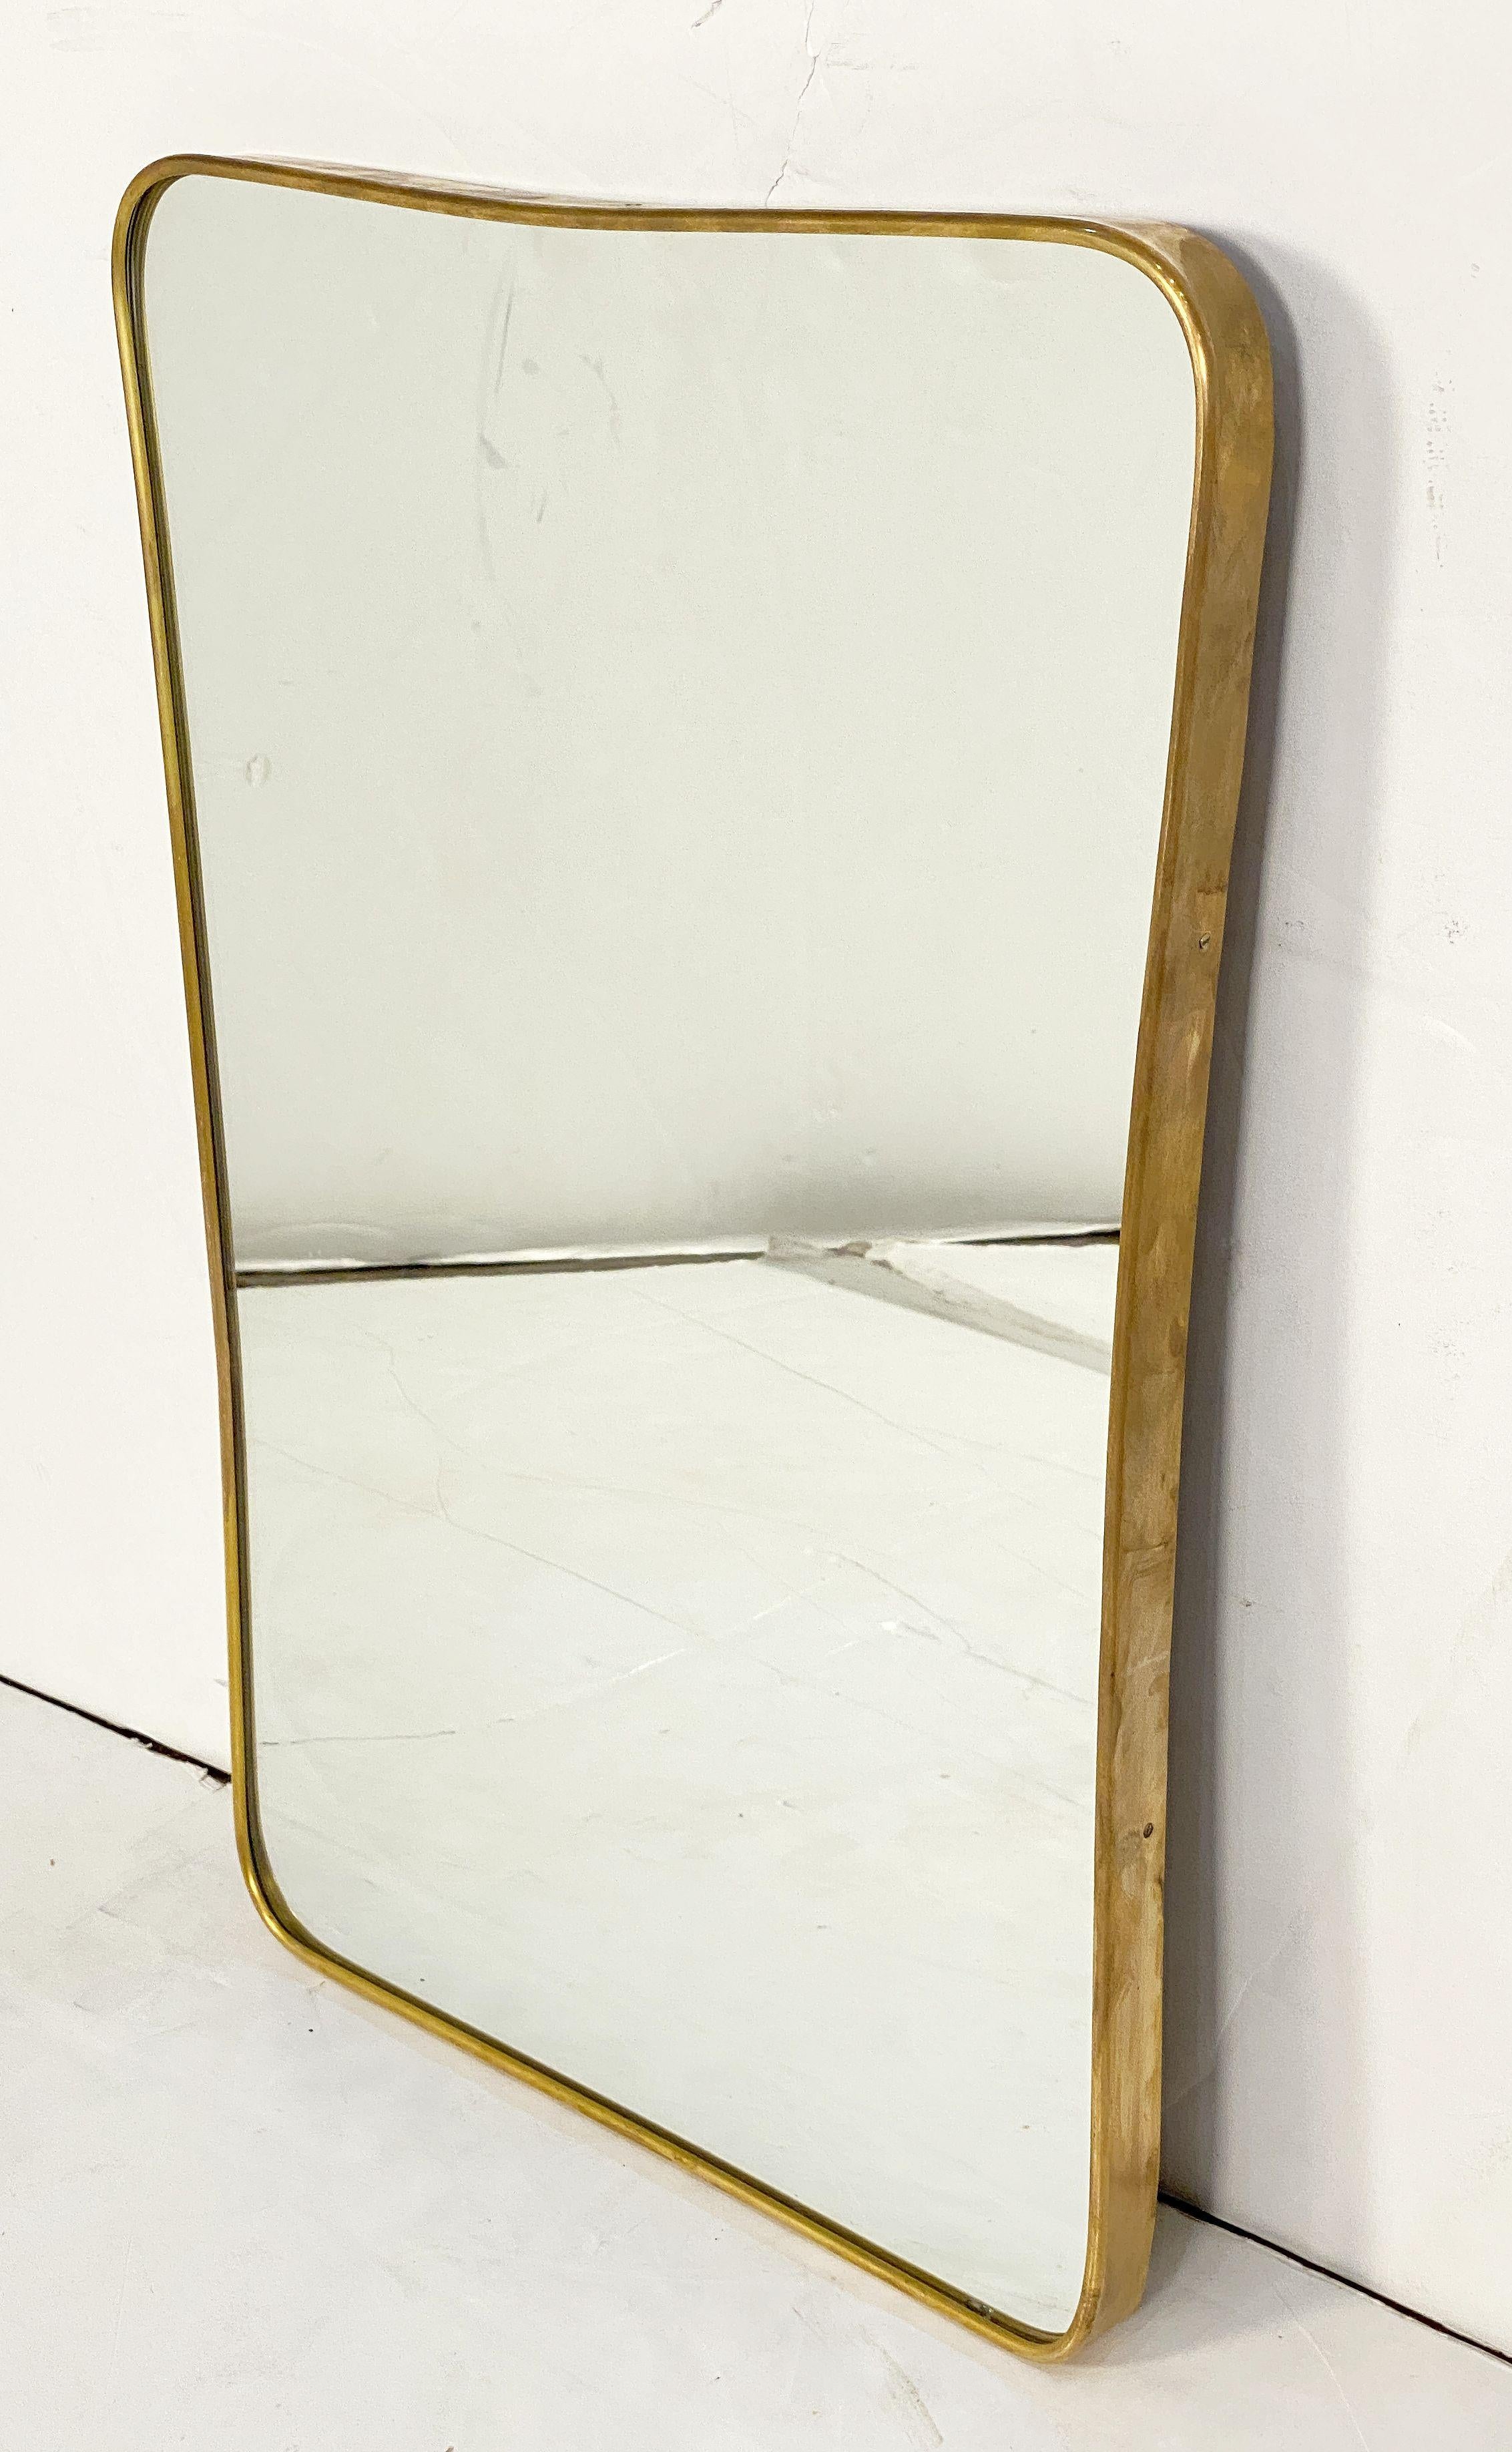 Italian Modern Gio Ponti Style Wall Mirror in Brass Frame (H 27 1/4 x W 19 3/4) In Good Condition For Sale In Austin, TX